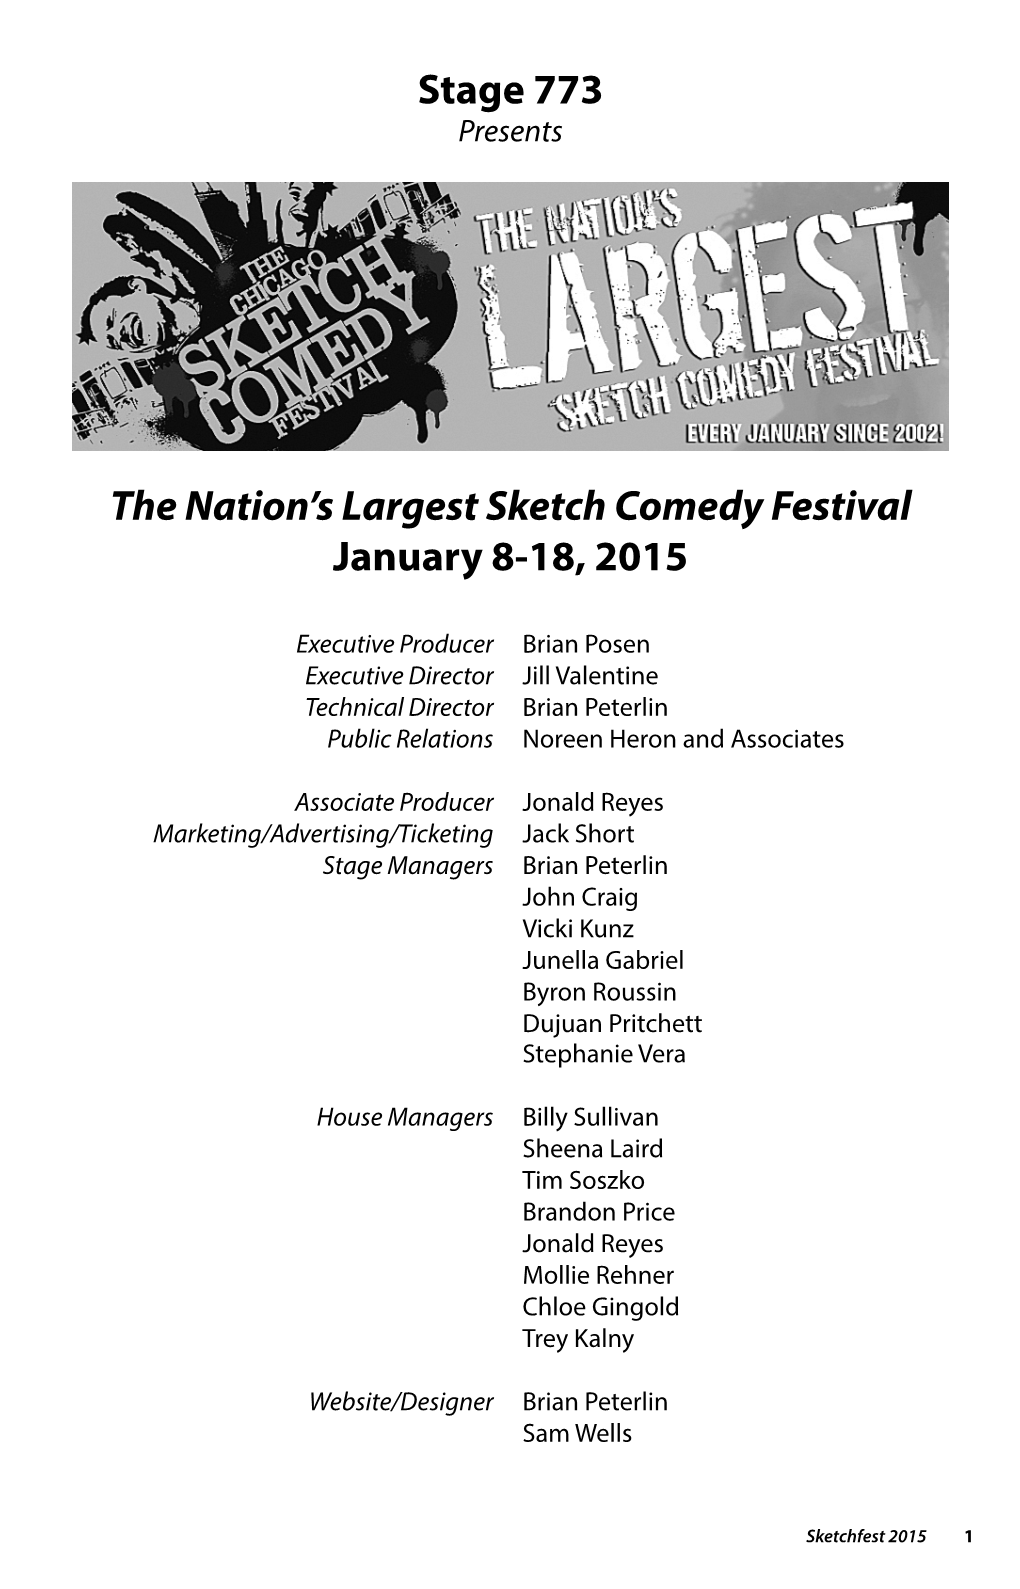 The Nation's Largest Sketch Comedy Festival January 8-18, 2015